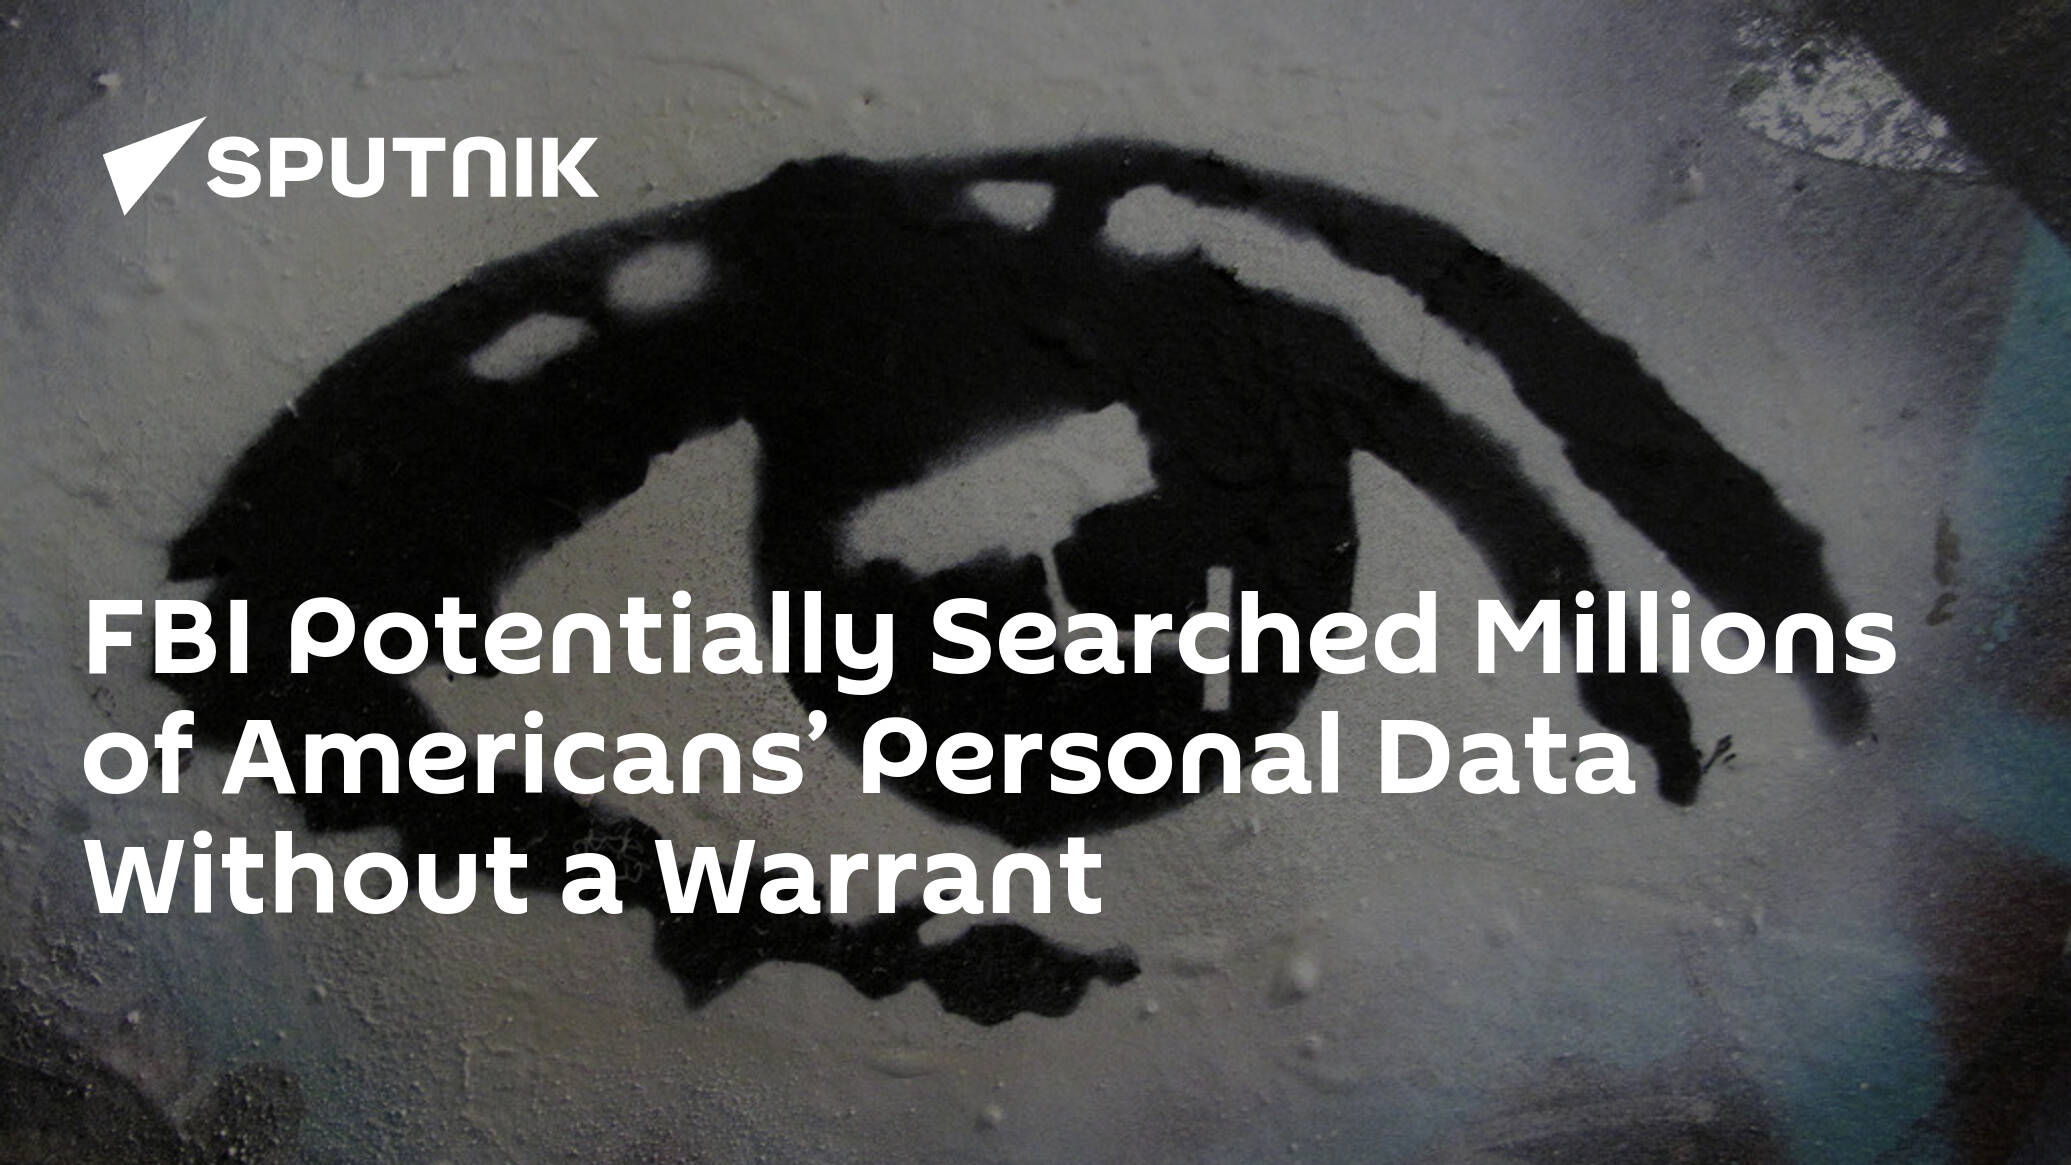 FBI Potentially Searched Millions of Americans' Personal Data Without a Warrant - 29.04.2022, Sputnik International